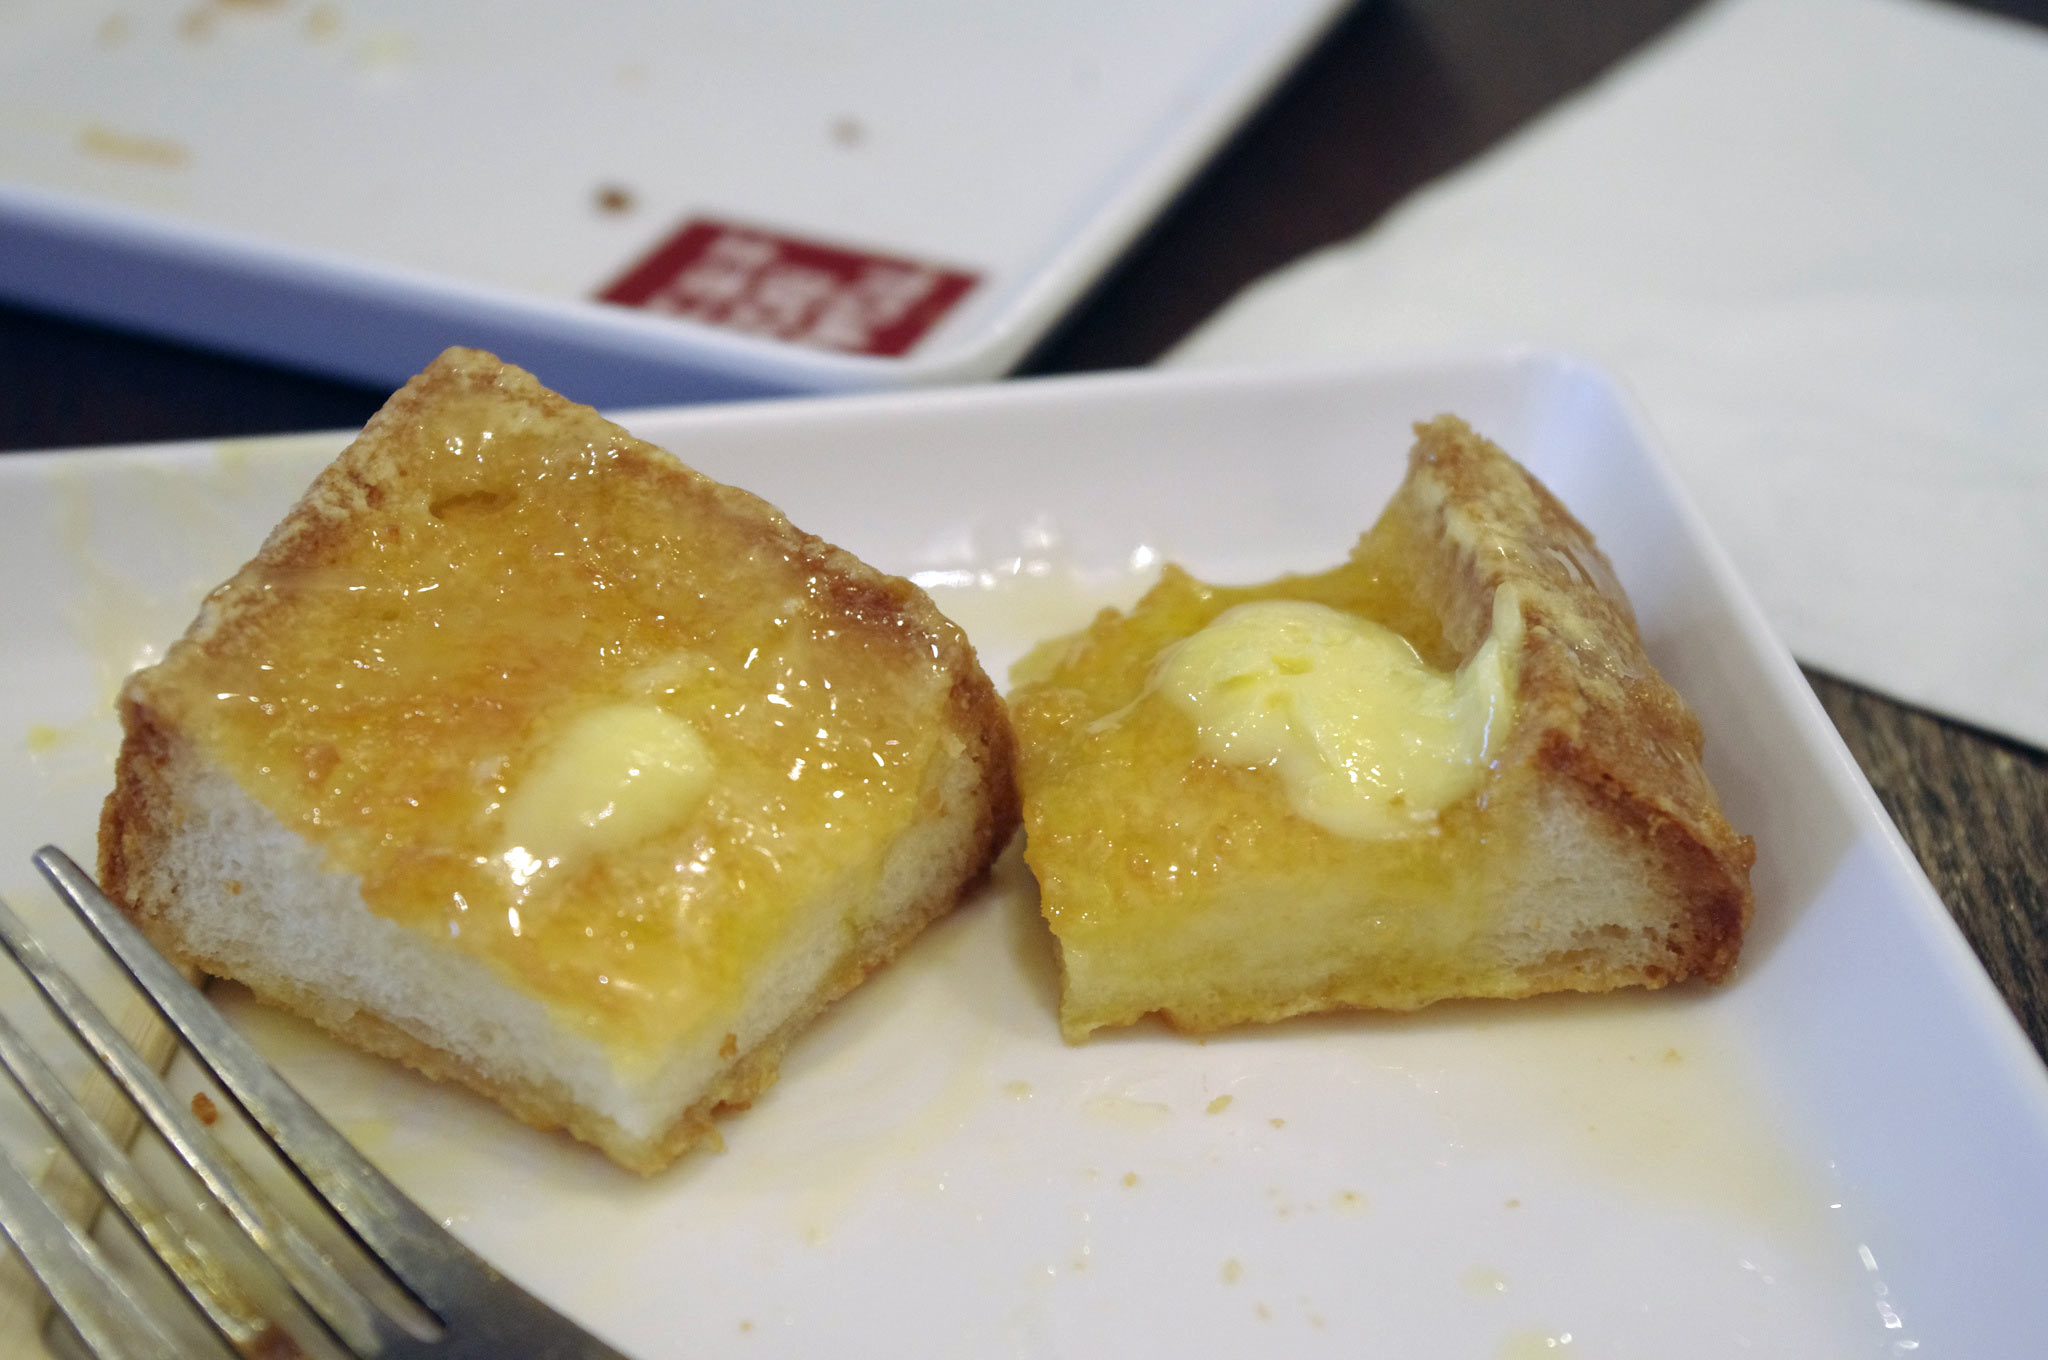 French Toast Butter Kaya at Toast Box in Hong Kong. Photo by alphacityguides.